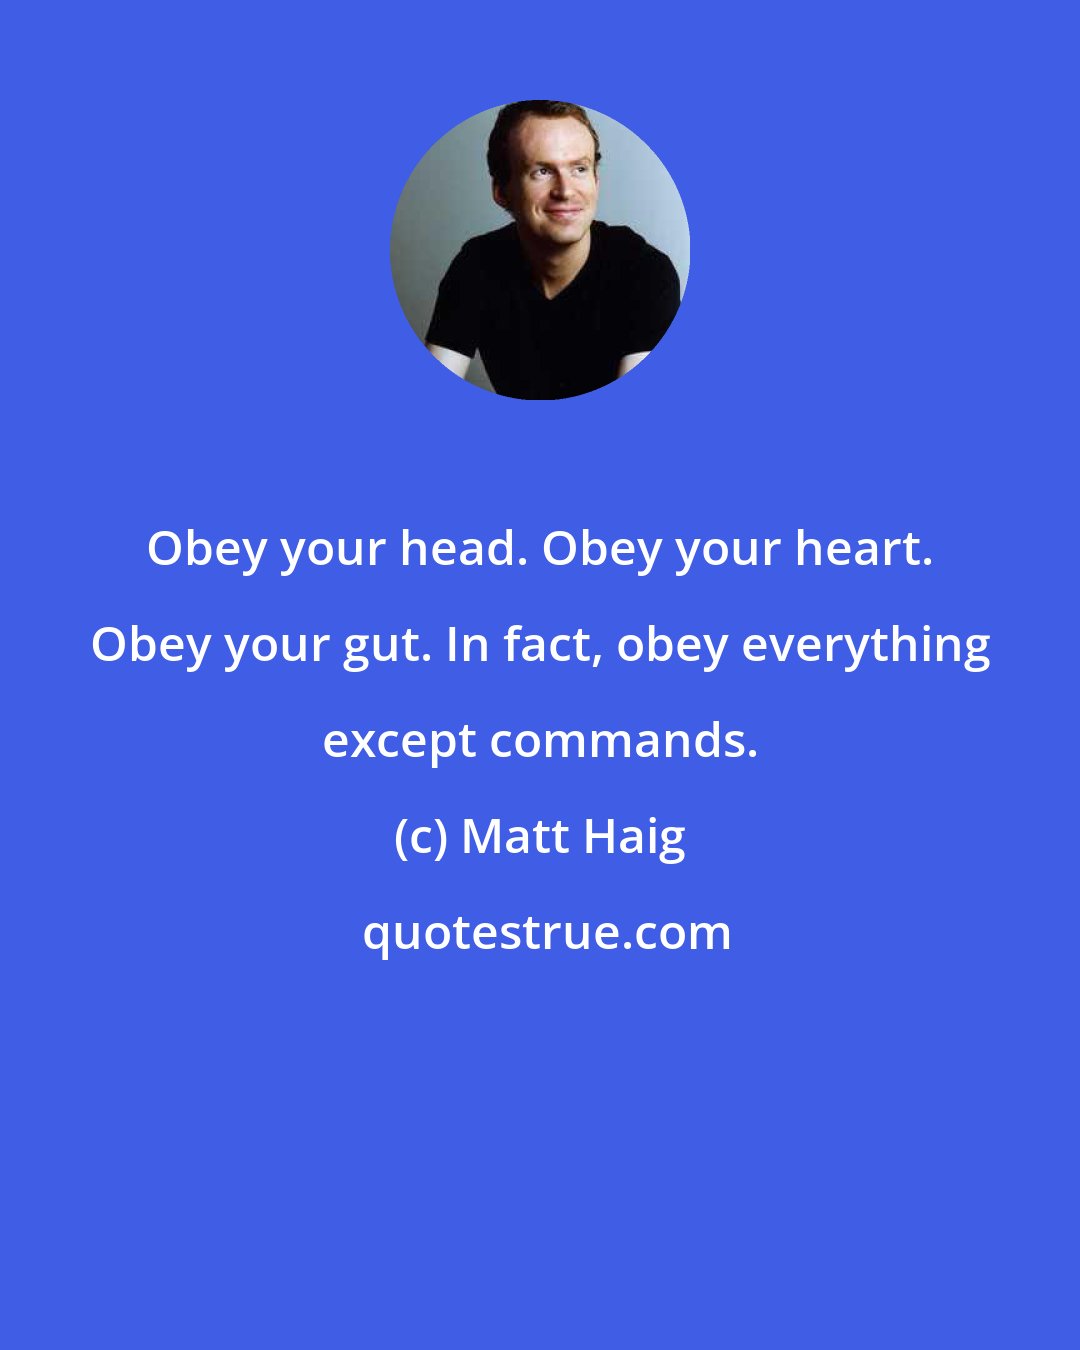 Matt Haig: Obey your head. Obey your heart. Obey your gut. In fact, obey everything except commands.